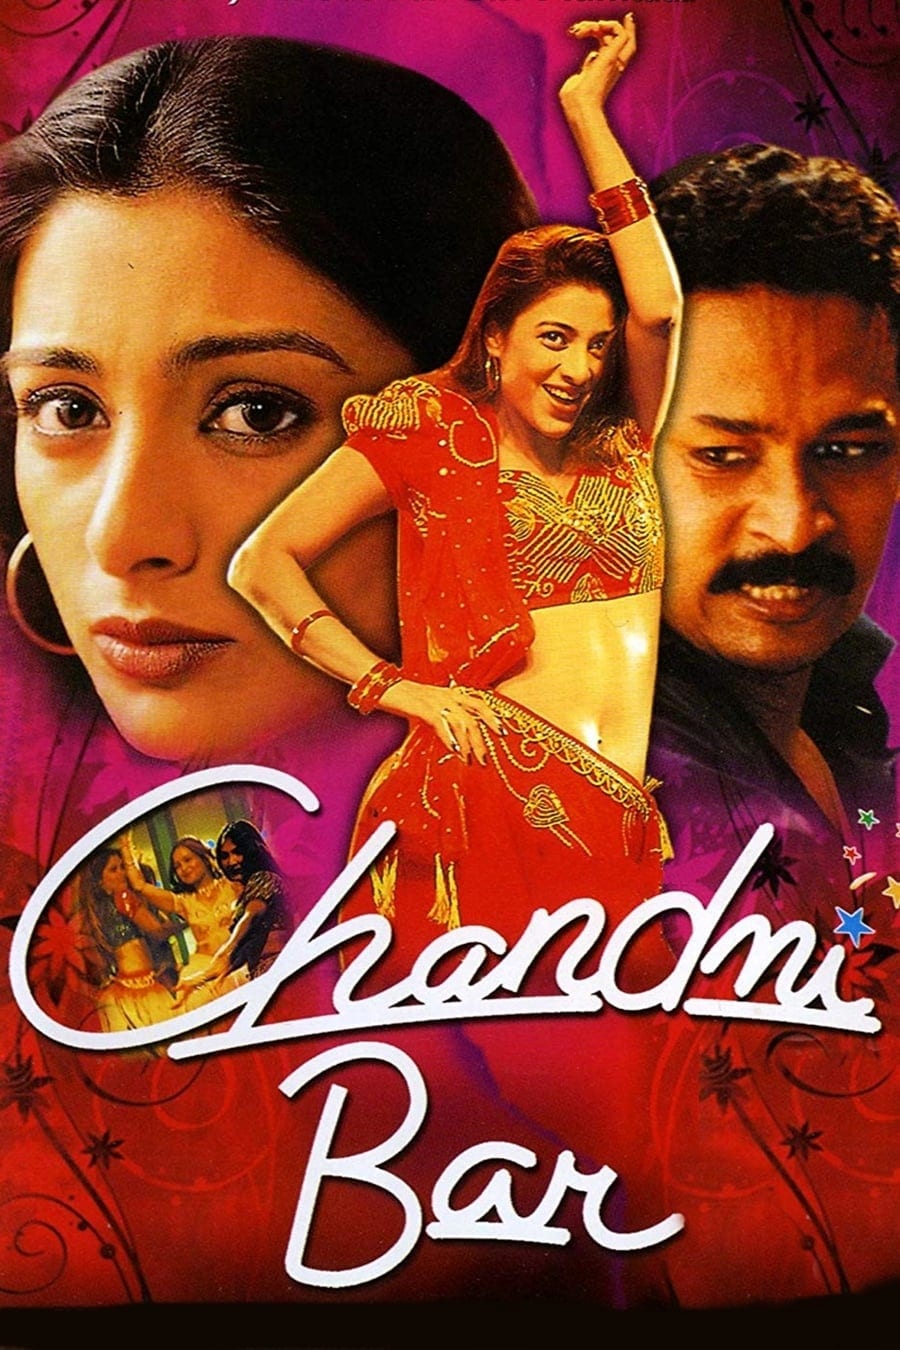 Poster for the movie "Chandni Bar"